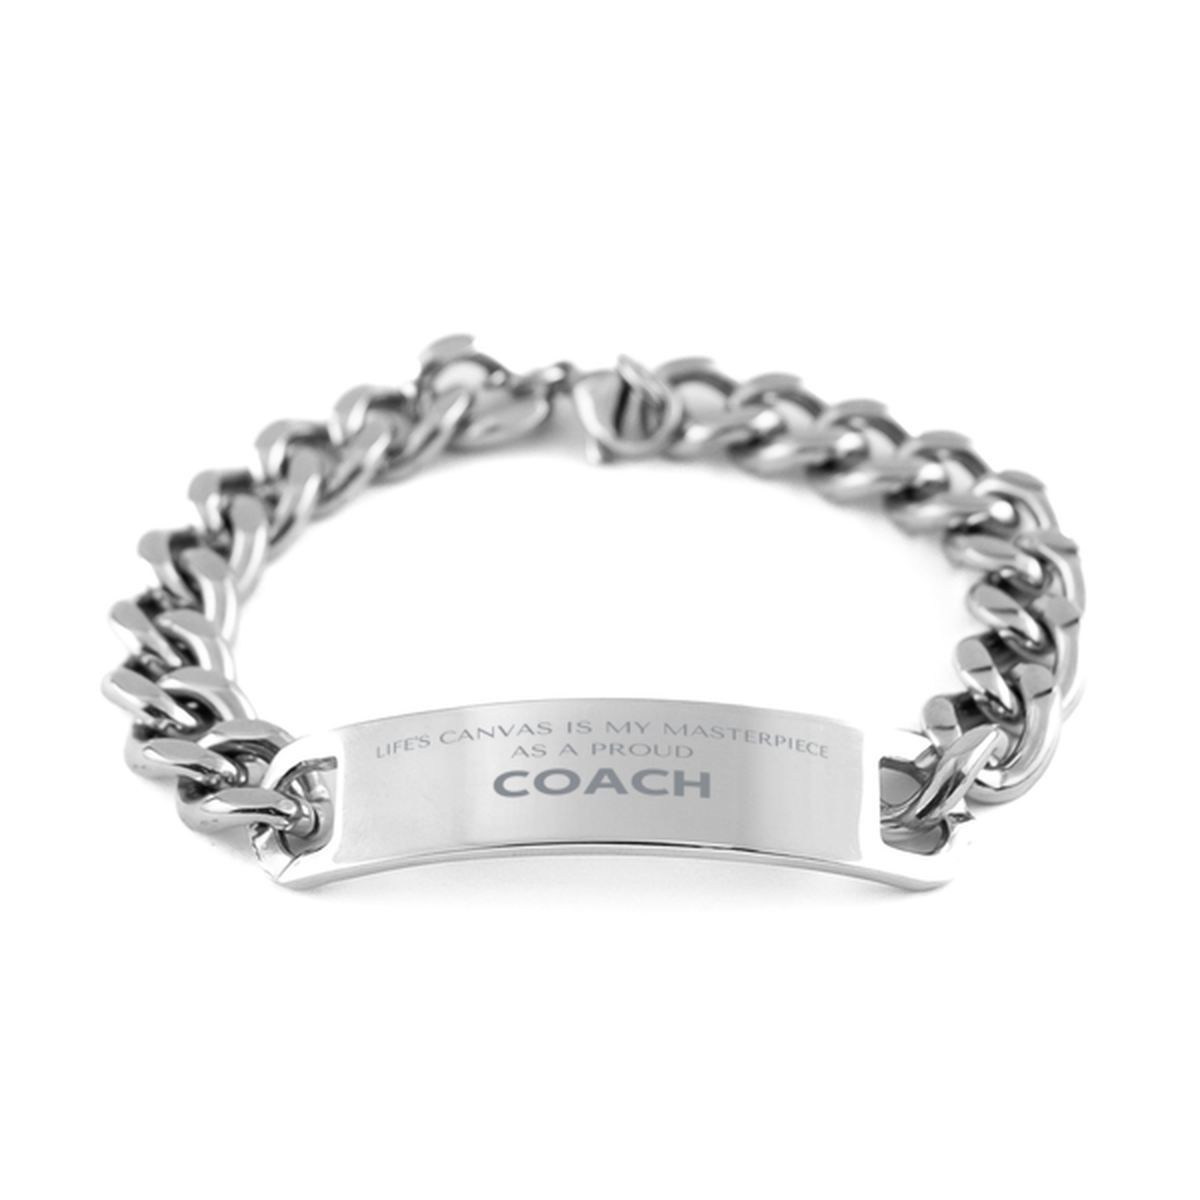 Proud Coach Gifts, Life's canvas is my masterpiece, Epic Birthday Christmas Unique Cuban Chain Stainless Steel Bracelet For Coach, Coworkers, Men, Women, Friends